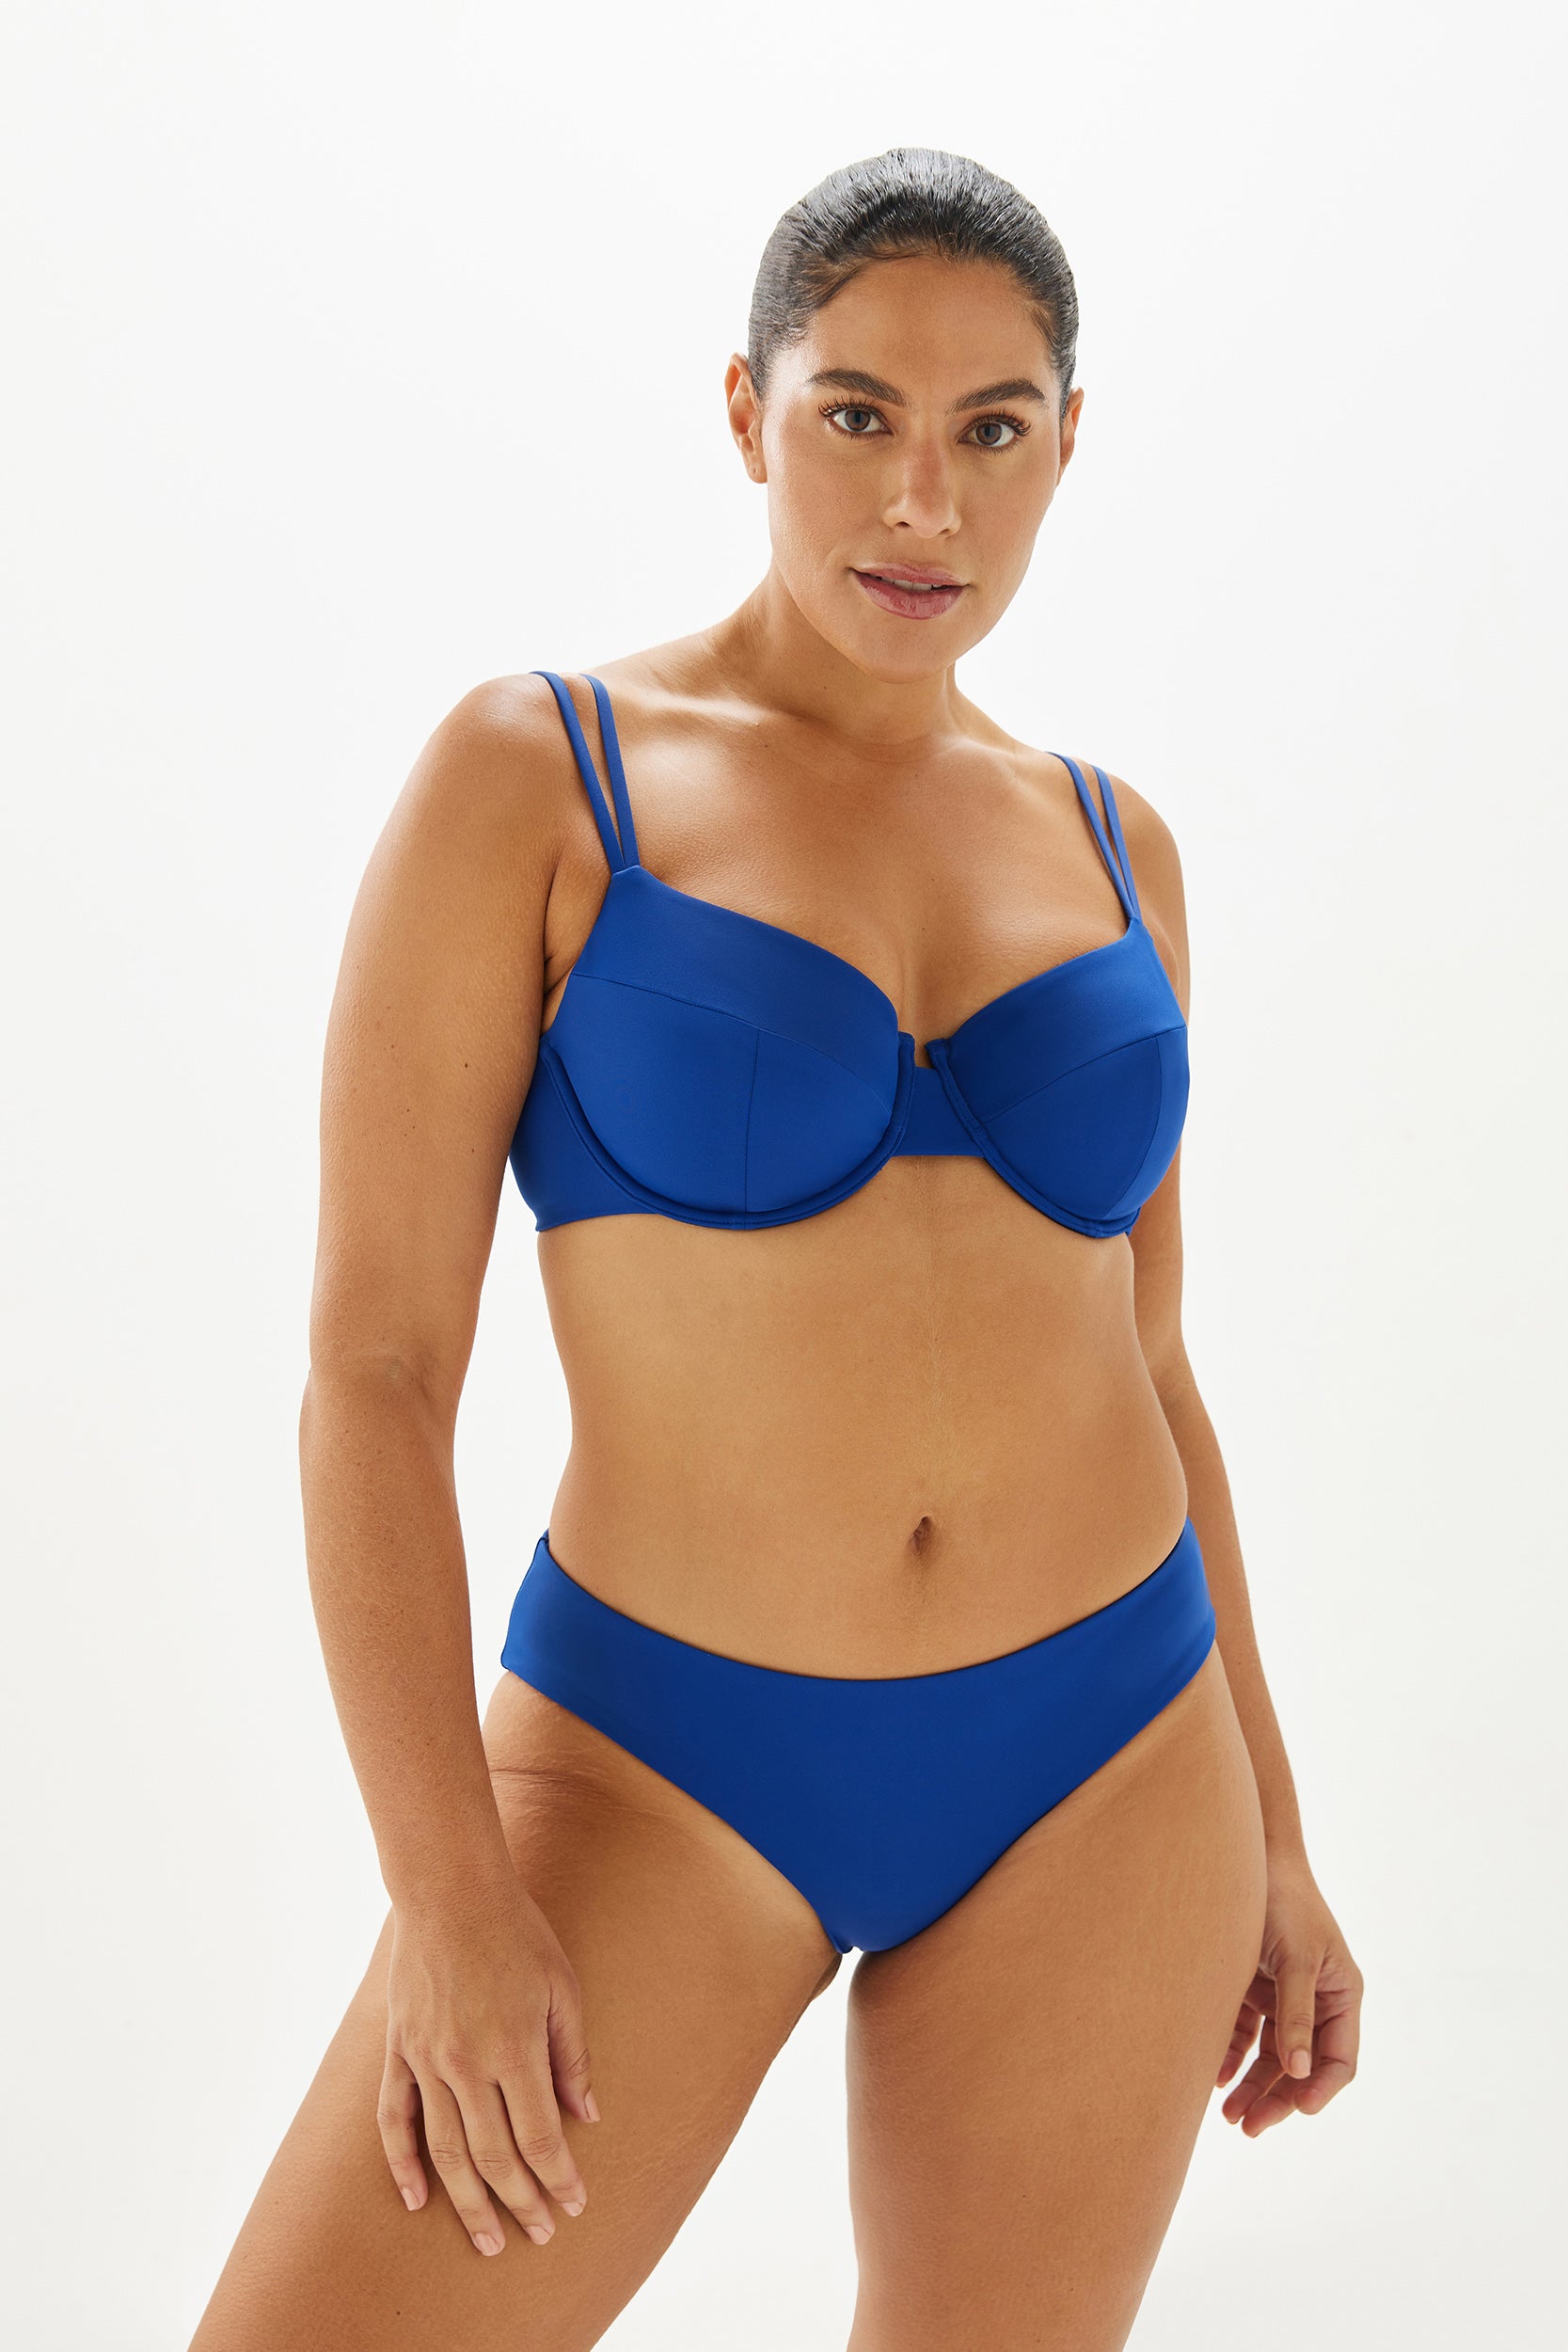 The Line Pool Top, D+ Cup Bikini, Form and Fold Larger Bust Swimwear